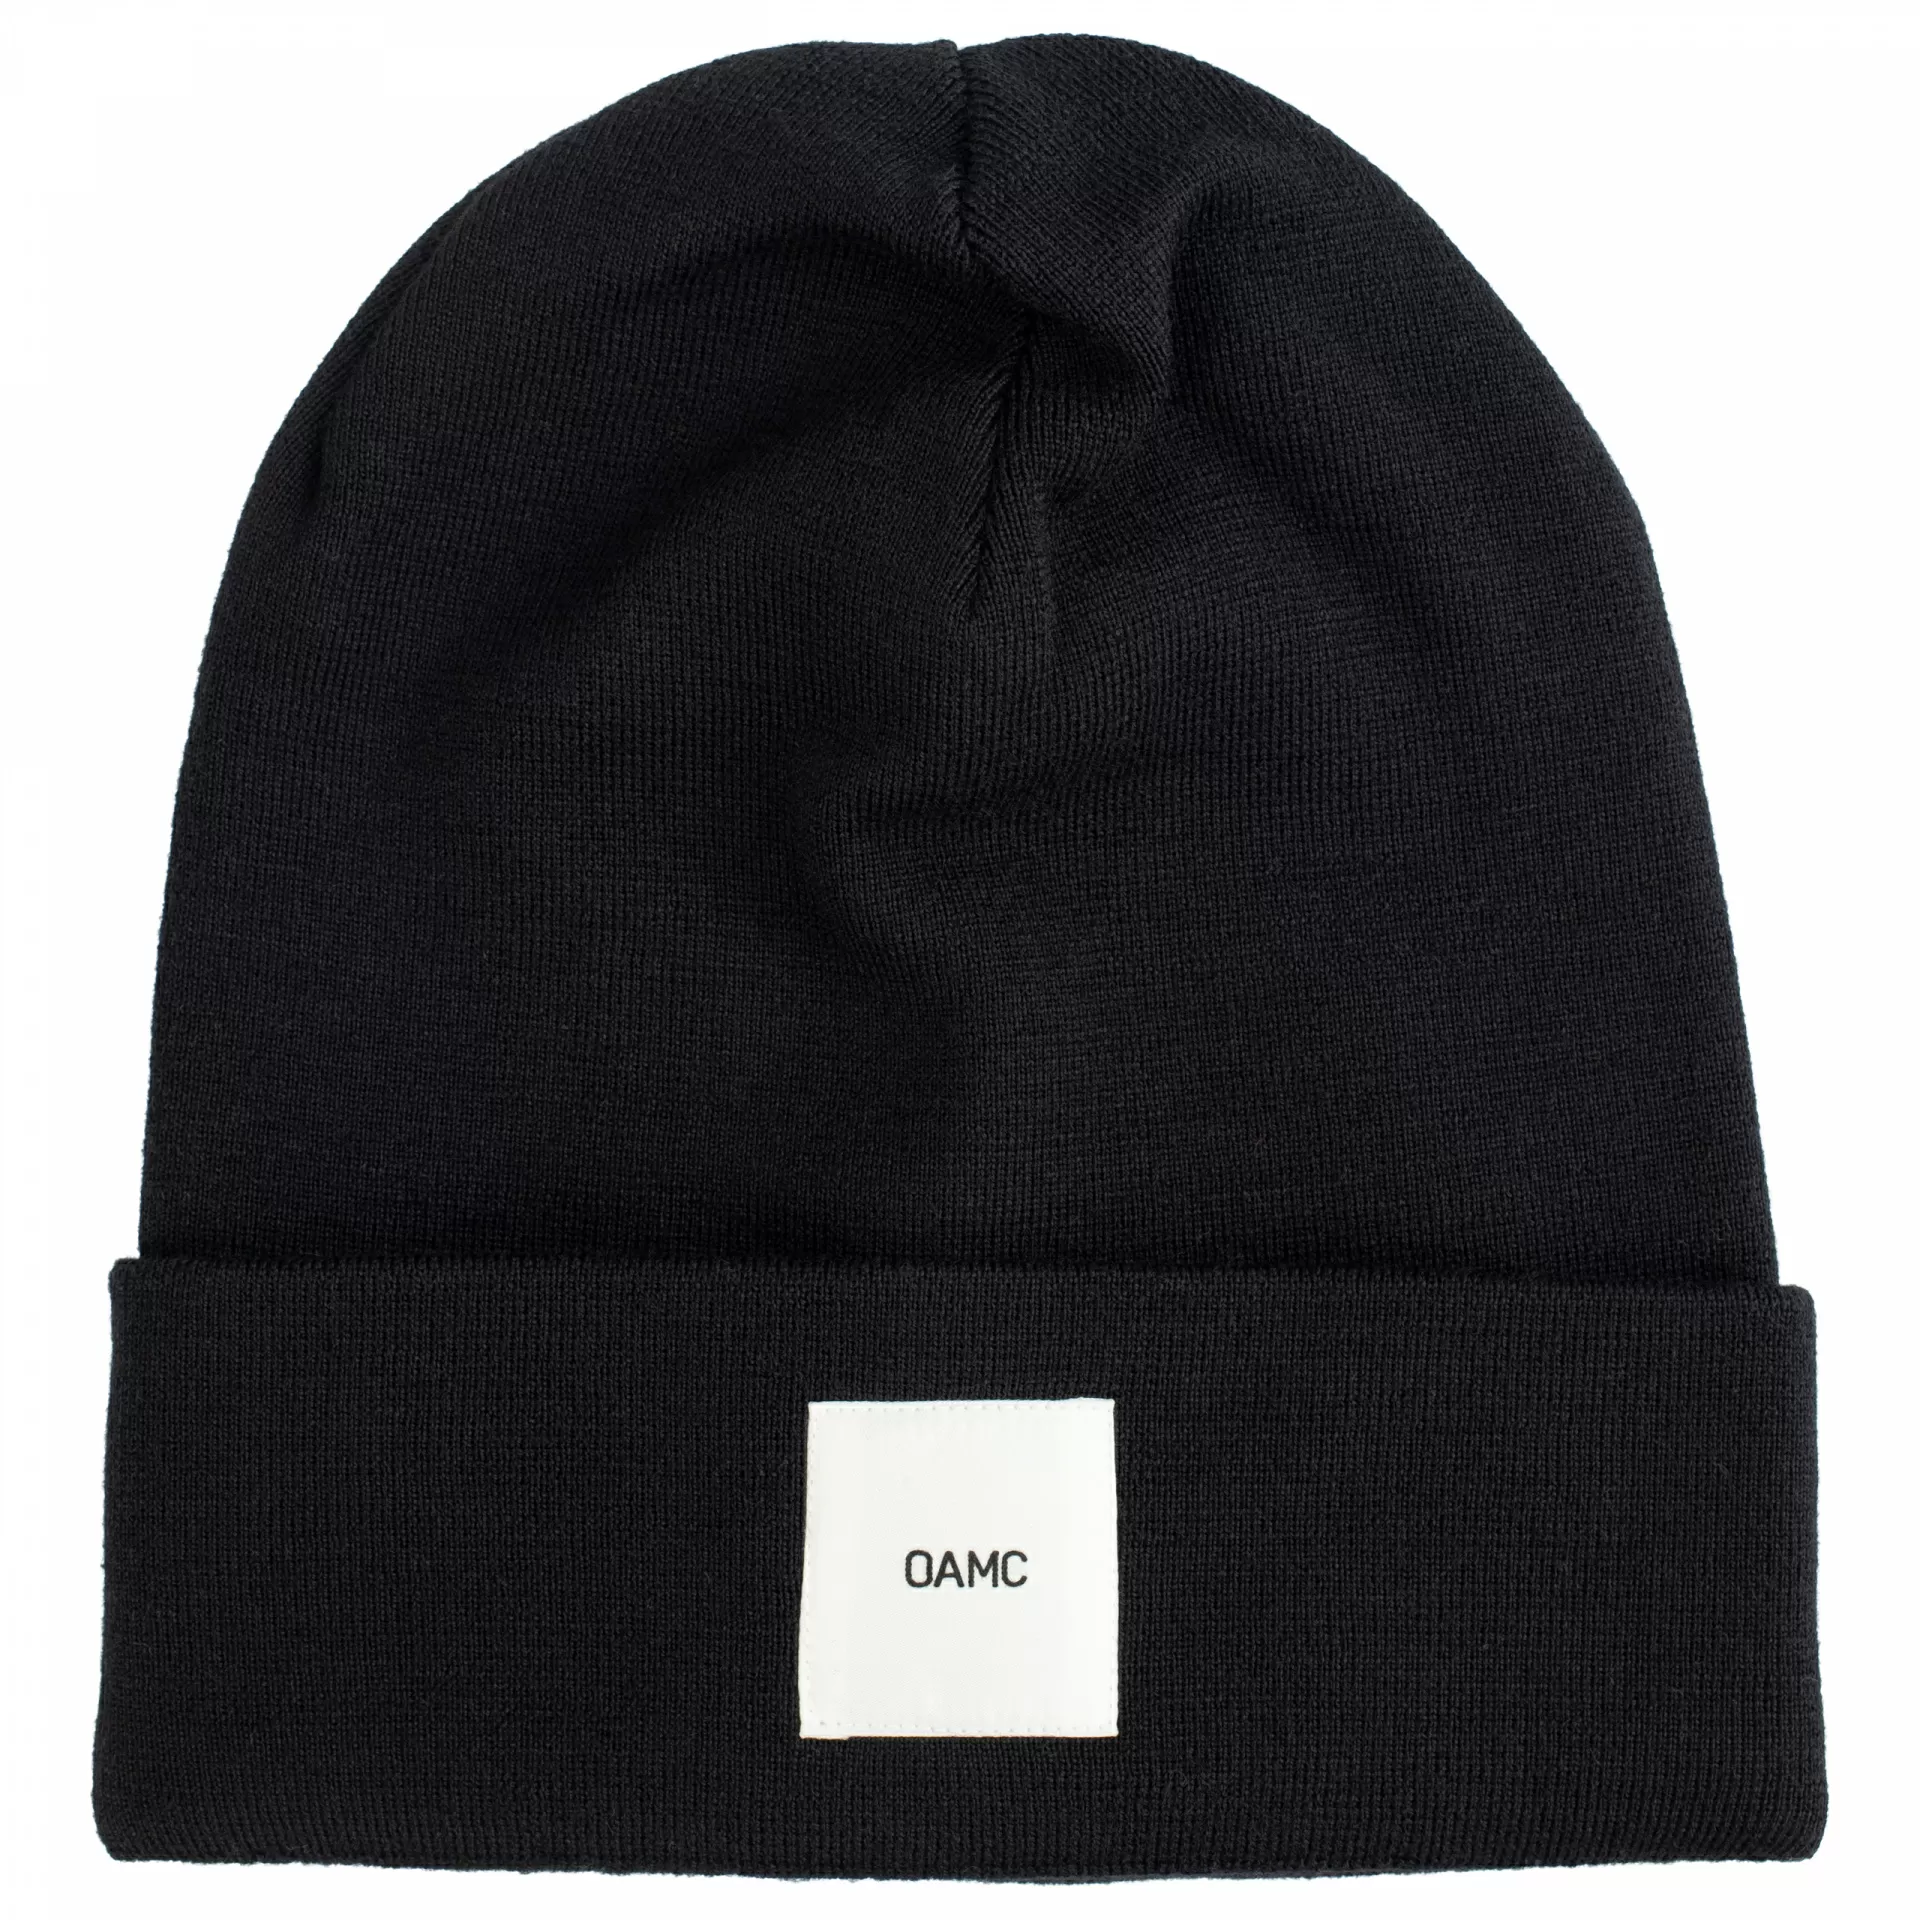 OAMC BLACK PATCHED BEANIE,OABT752267/OTY20001/001